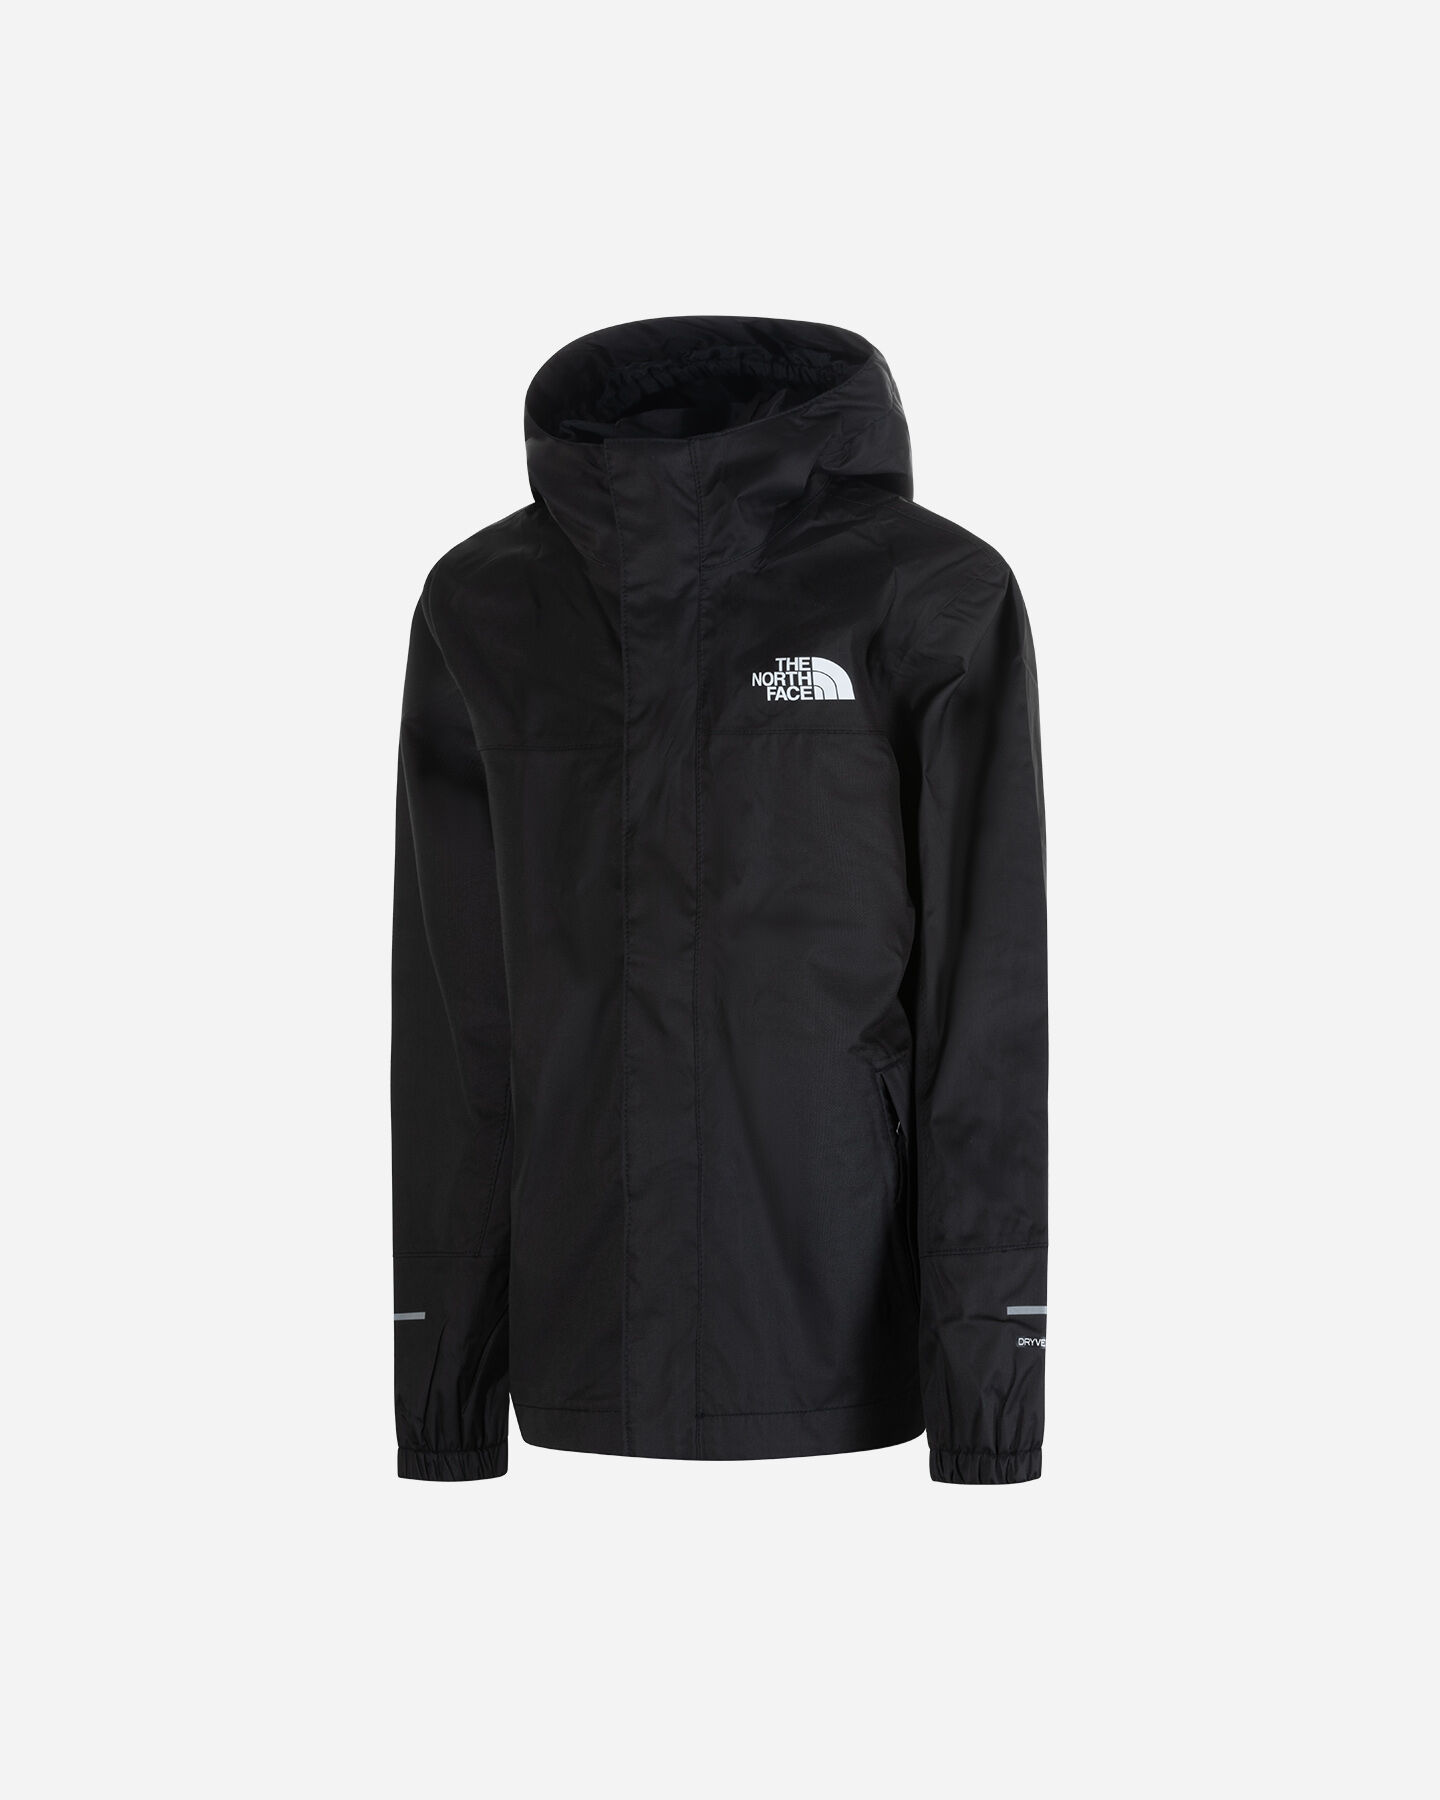  Giacca outdoor THE NORTH FACE ANTORA JR S5537465|JK3|L scatto 0